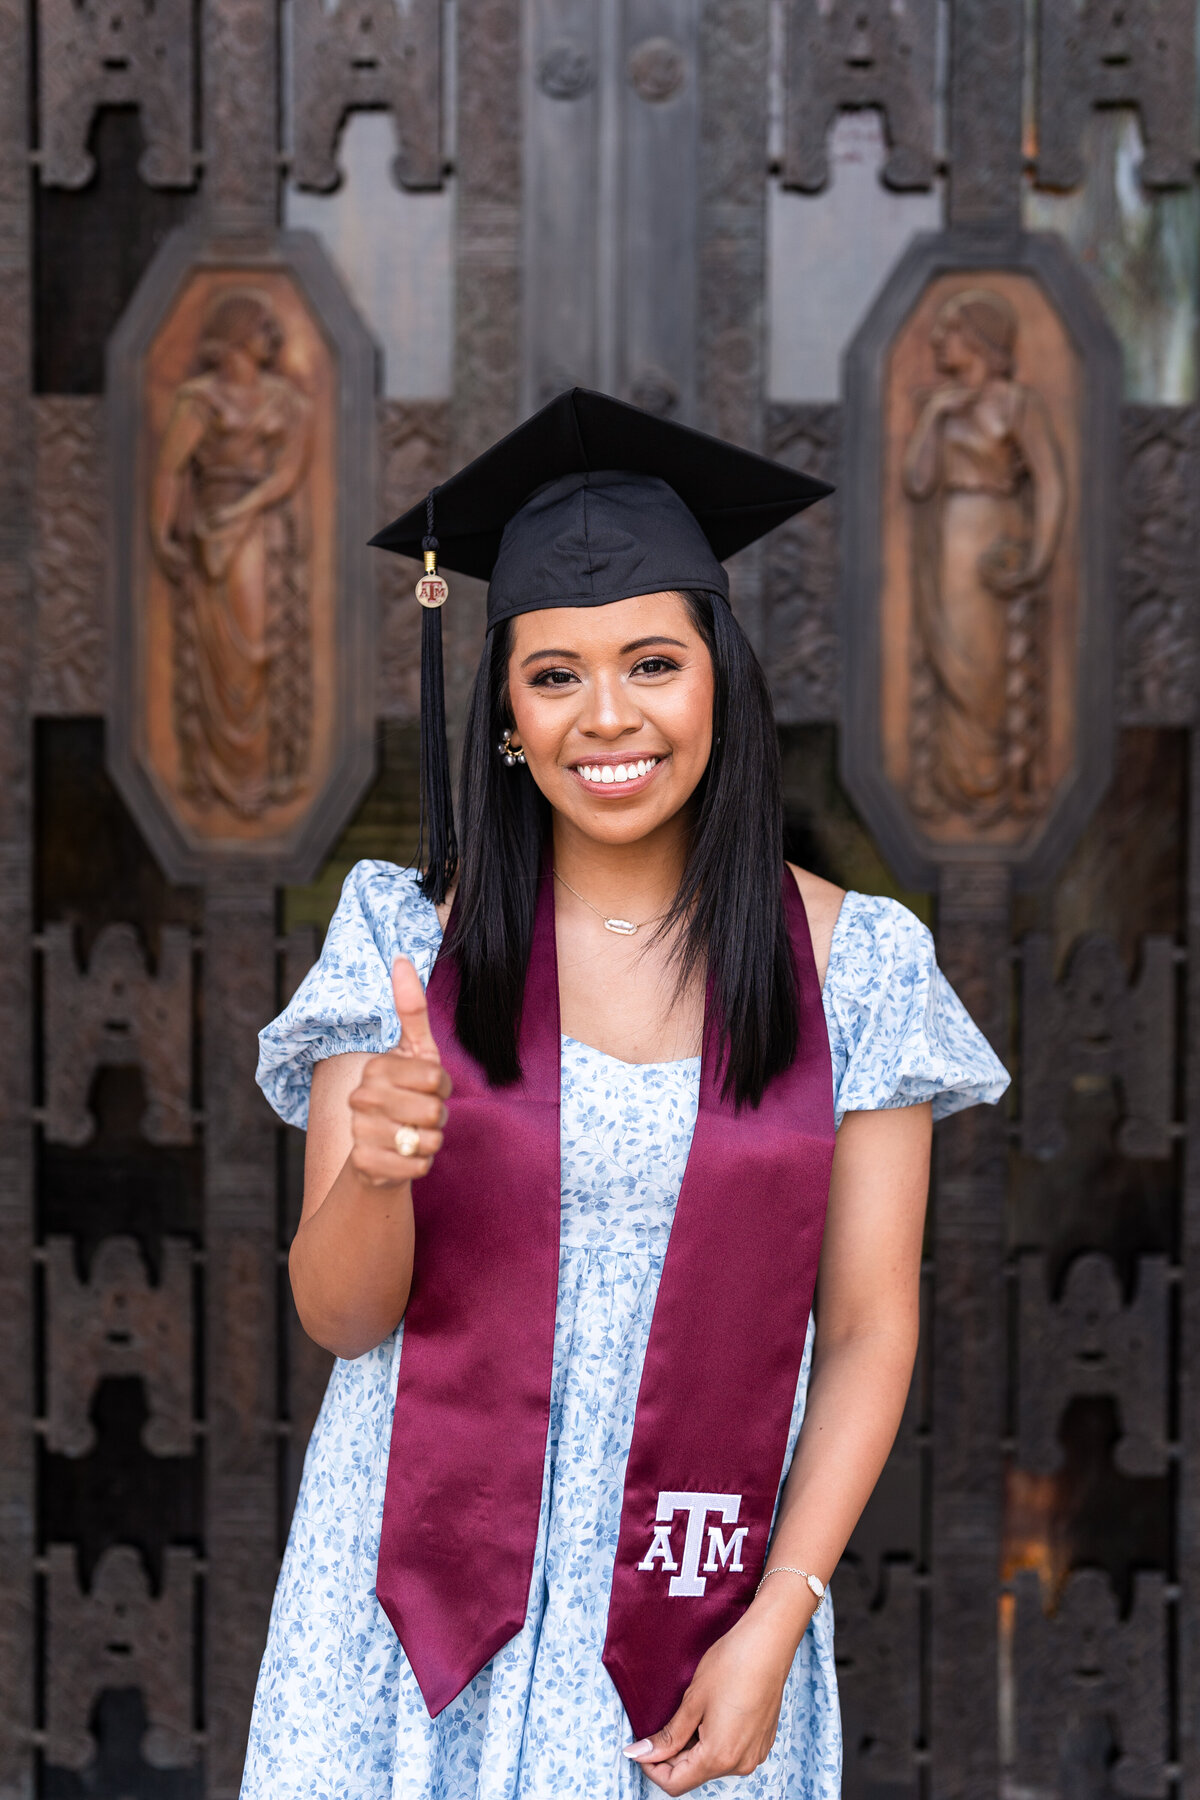 Texas A&M  senior girl holding stole and thumbs up wearing grad cap and blue dress in front of Administration building front door